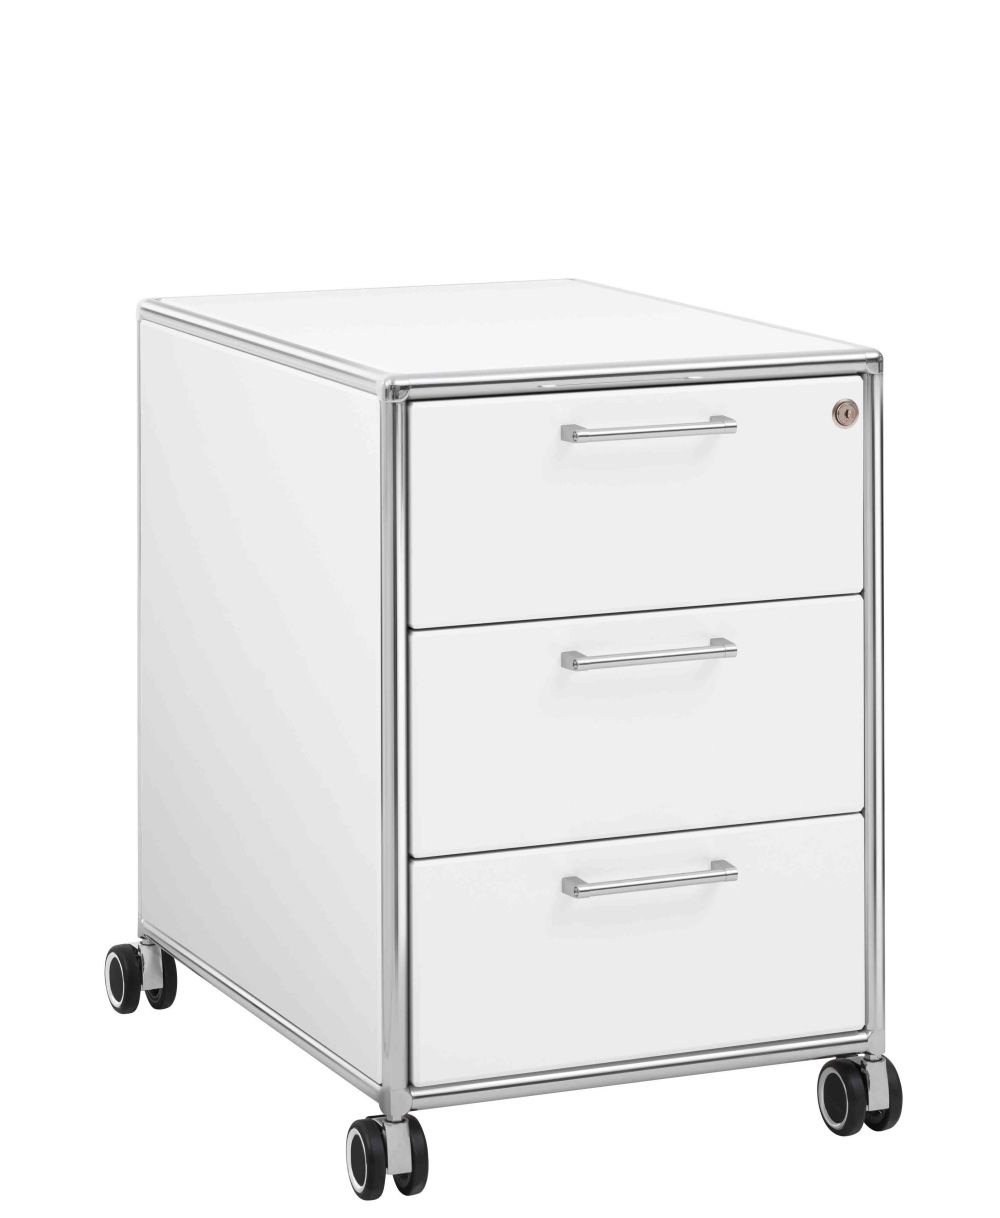 Bosse modul space Rollcontainer White